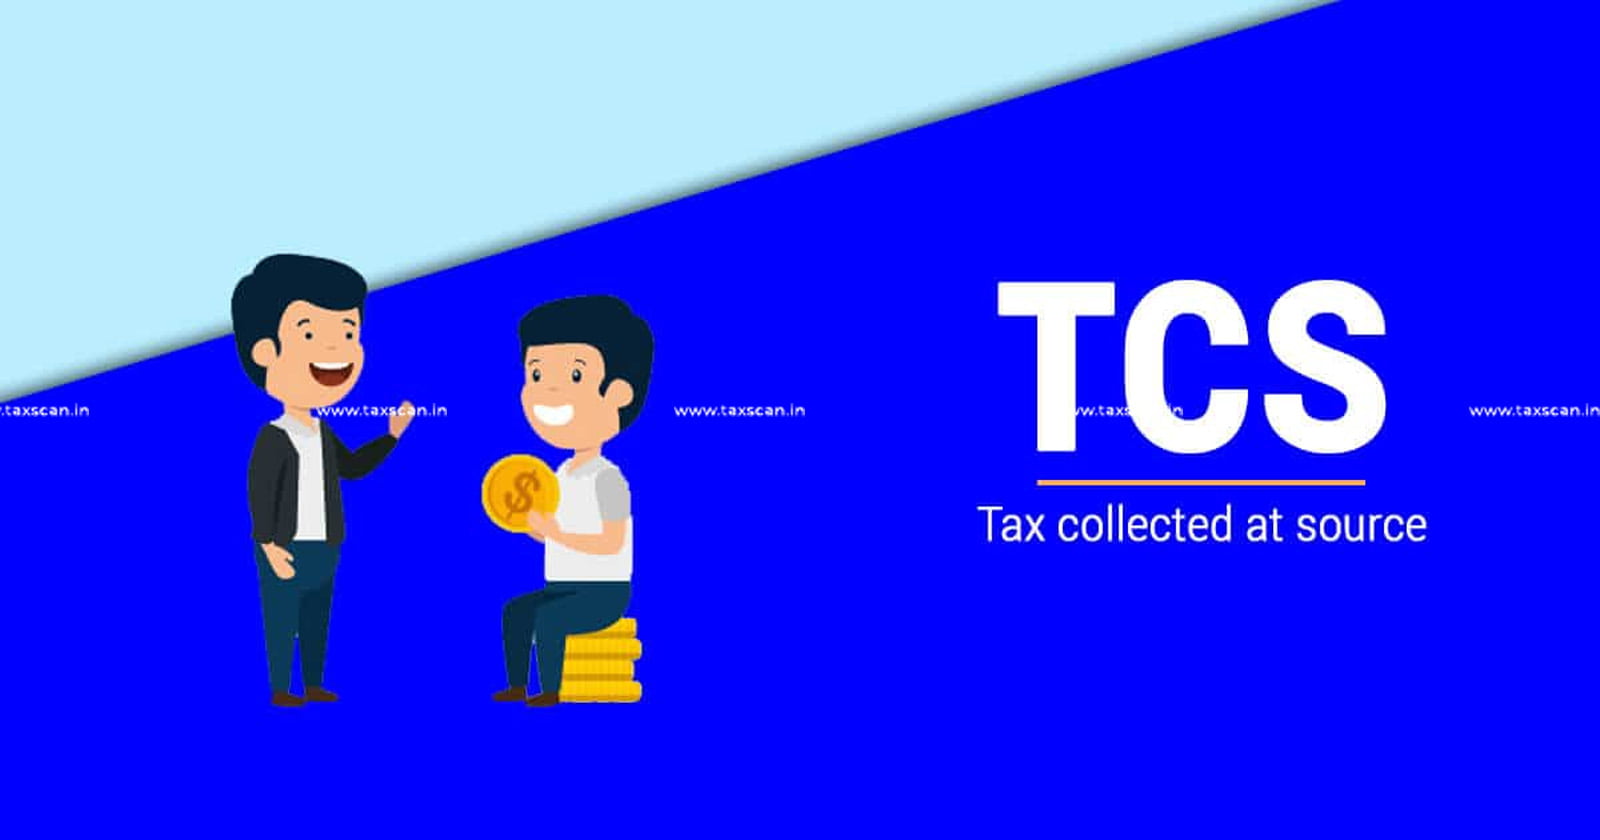 GST Council clarifies to issue - Circular on TCS Liability - CGST Act -TAXSCAN